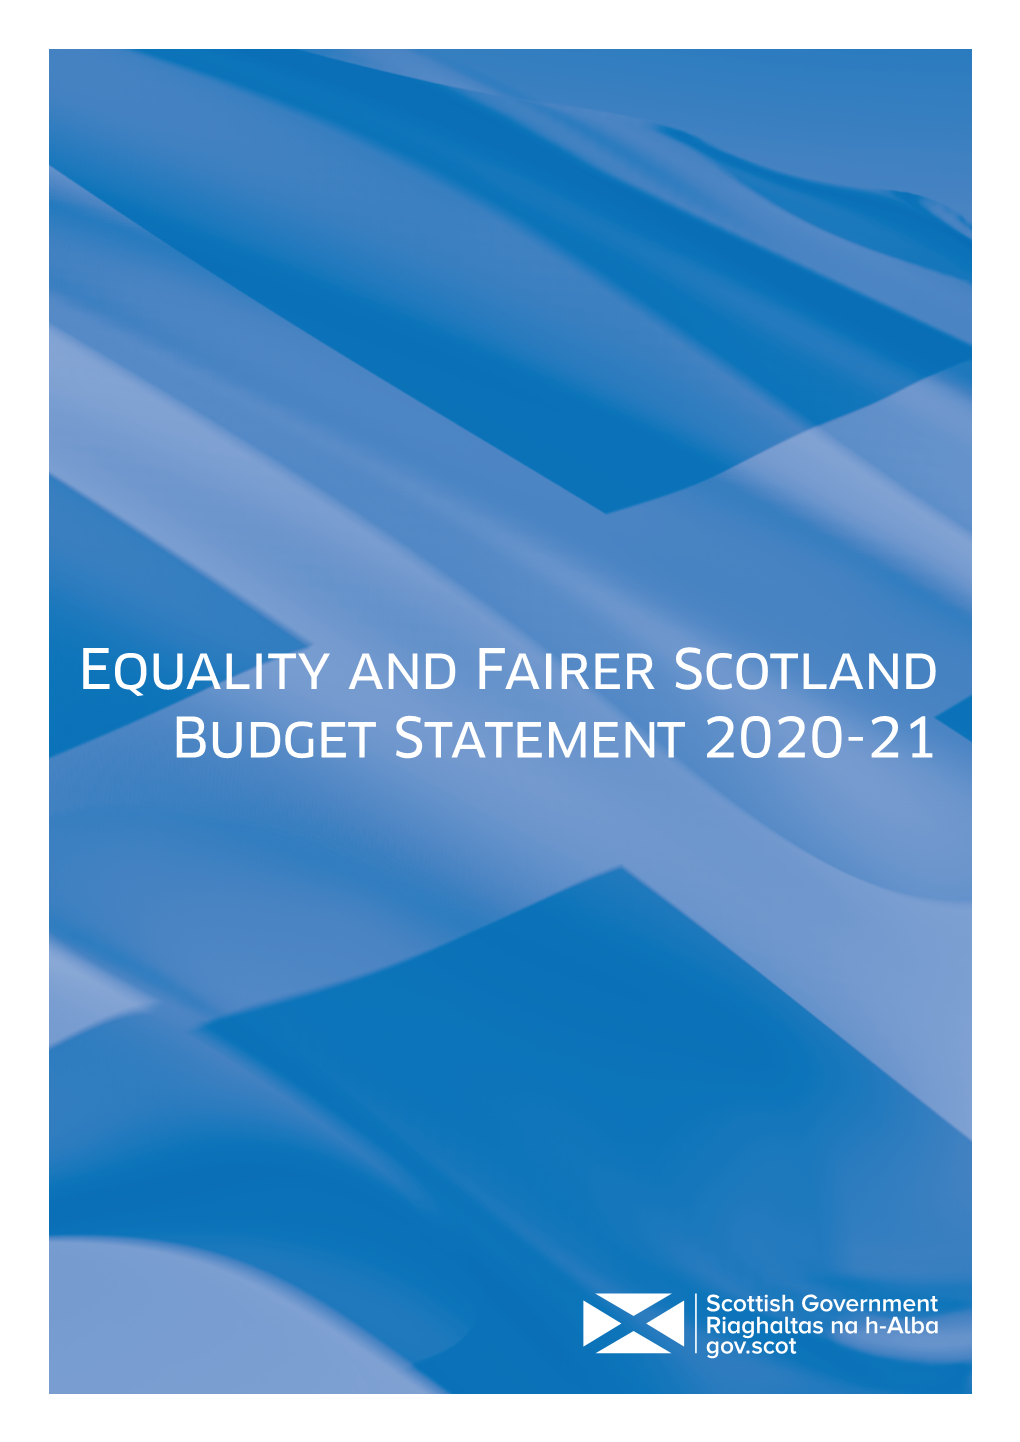 Equality and Fairer Scotland Budget Statement 2020-21 Equality and Fairer Scotland Budget Statement 2020-21